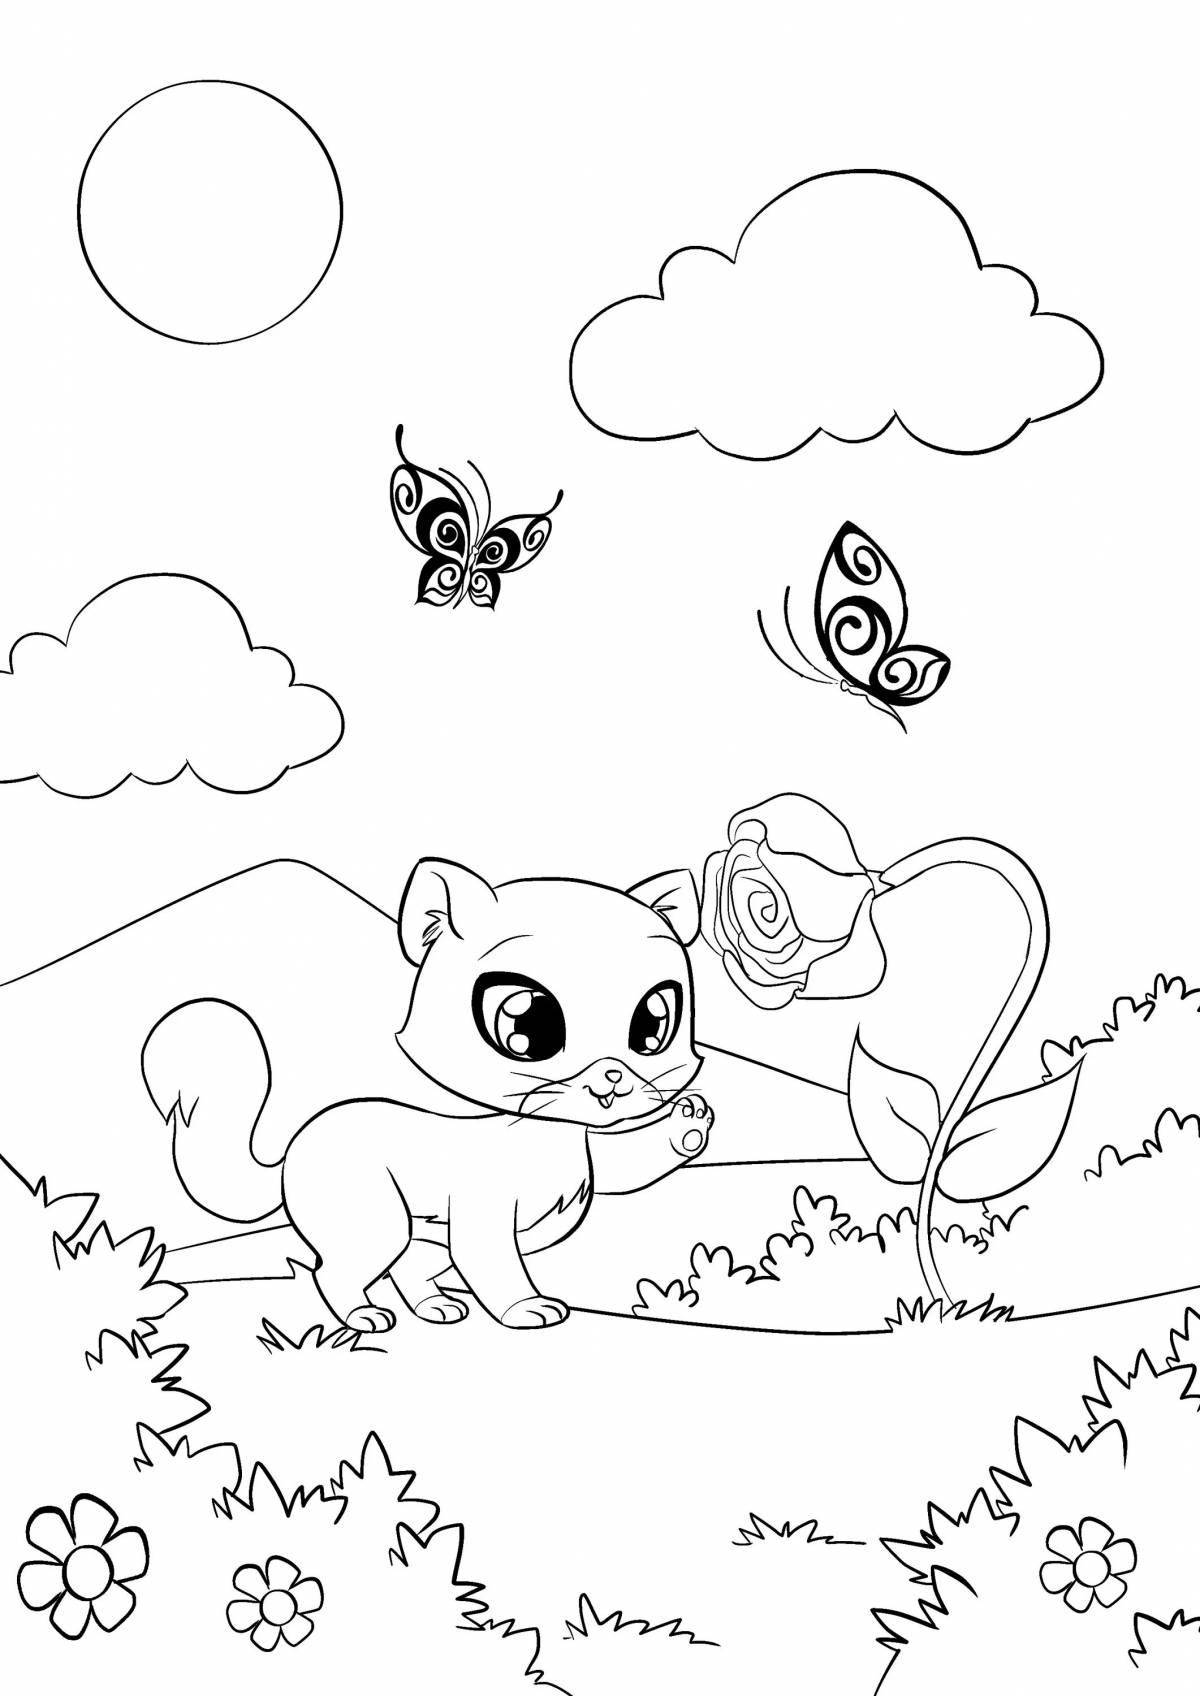 Snuggable cute kitten coloring page